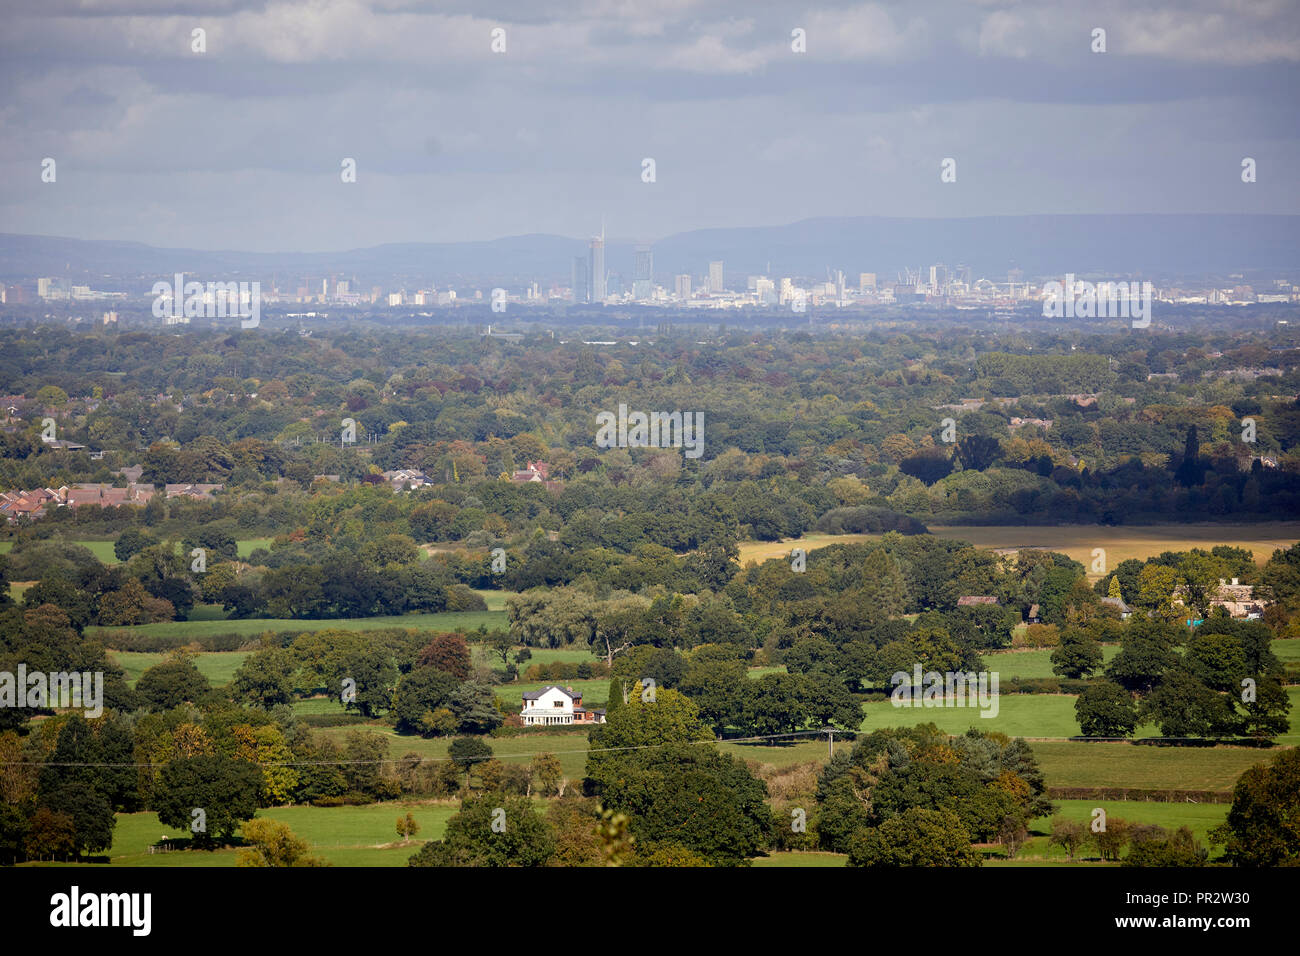 Alderley Edge, Cheshire, View from the Edge looking across the flat plain to manchester city centre skyline Stock Photo